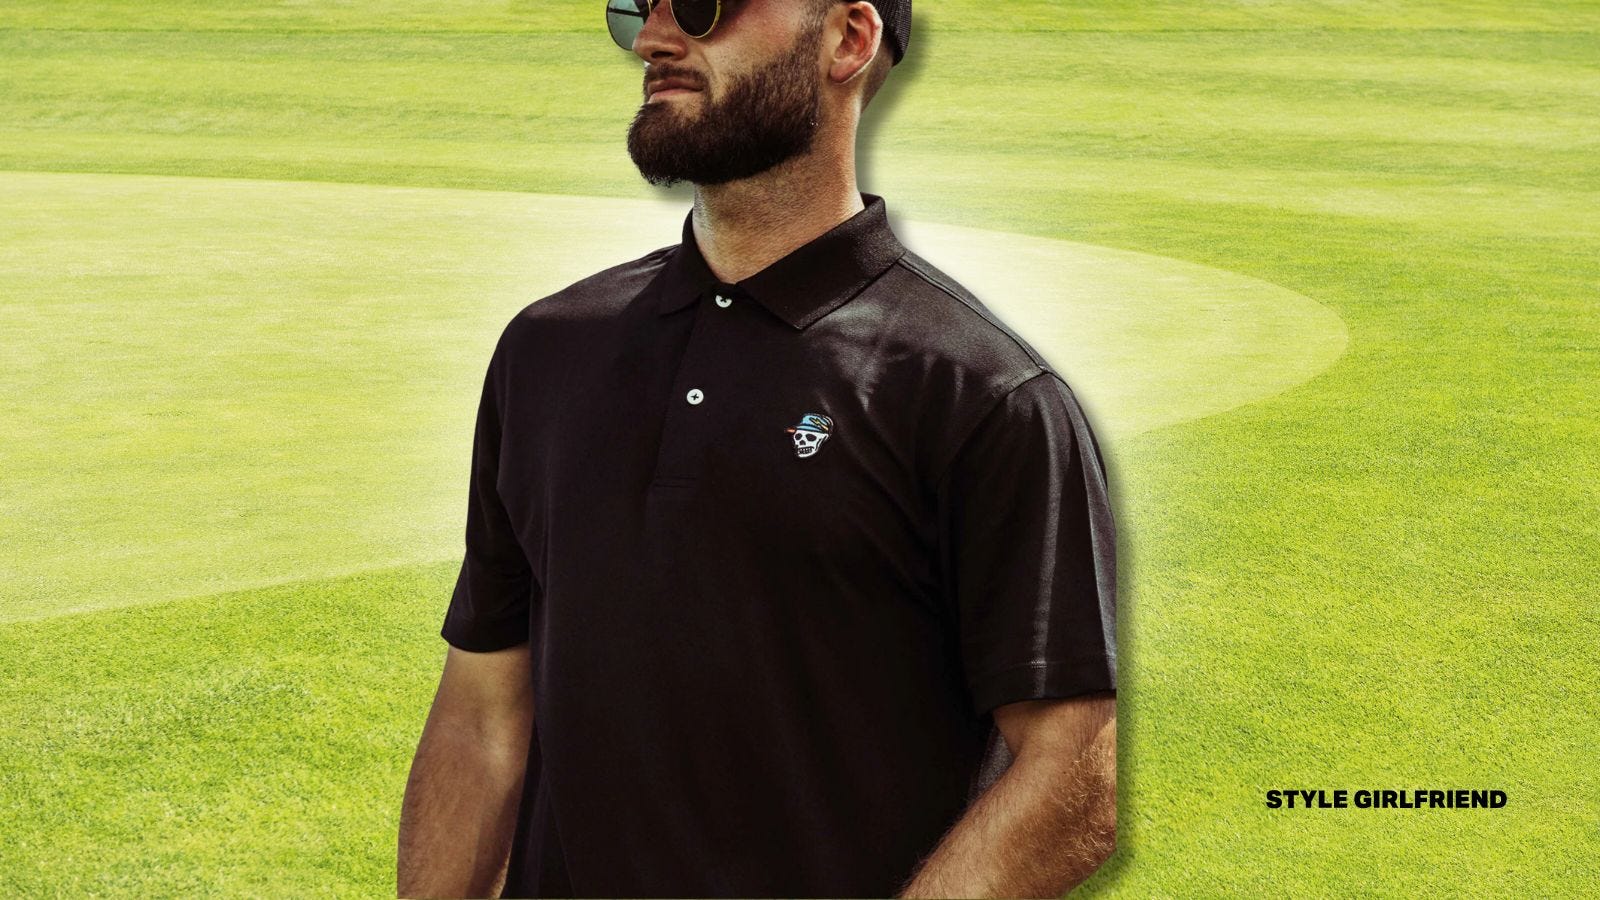 close-up of man's torso, wearing a black golf polo shirt with a small skull logo on the chest